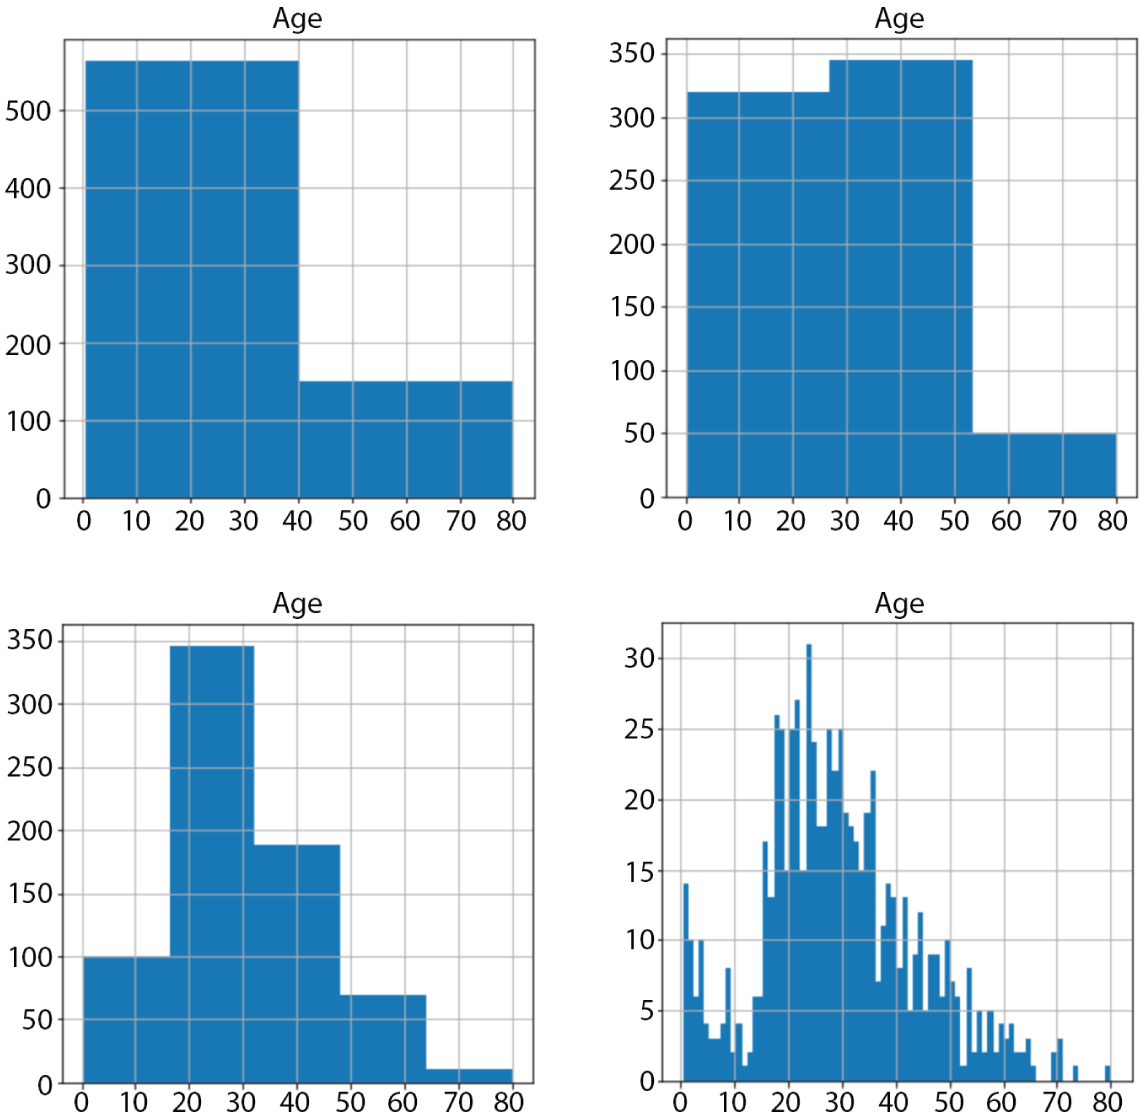 Histograms depict the numerous features in the Titanic dataset such as Age using different bin widths.